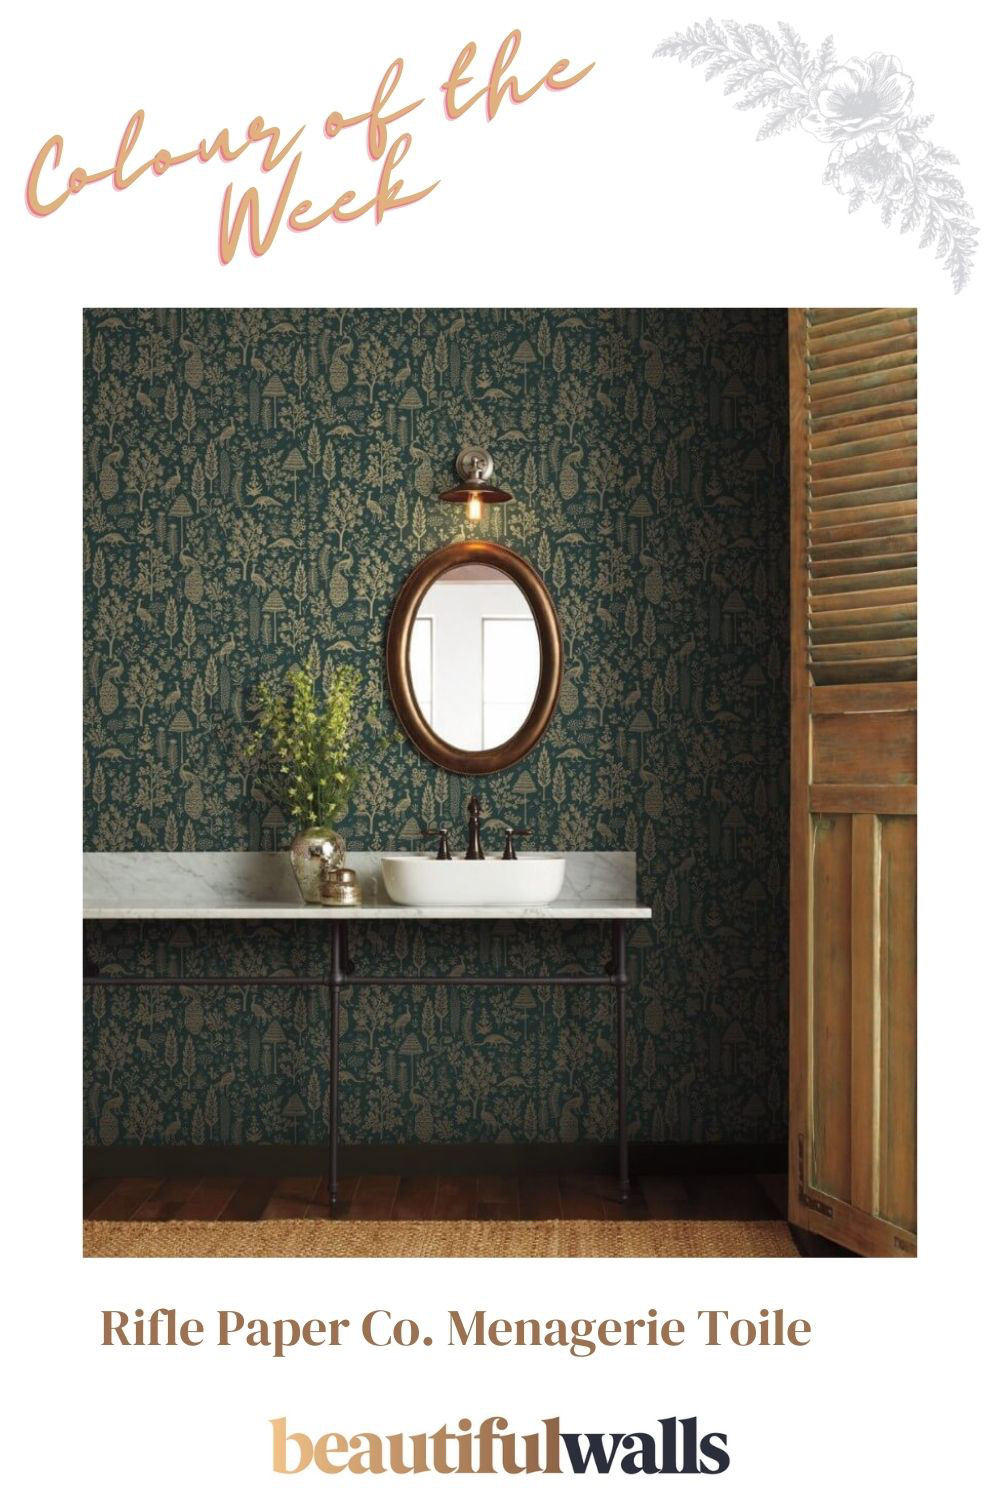 Advertising  beautiful walls Colour of the week gold green Menagerie menagerie toile rifle paper co Social media post wallpaper